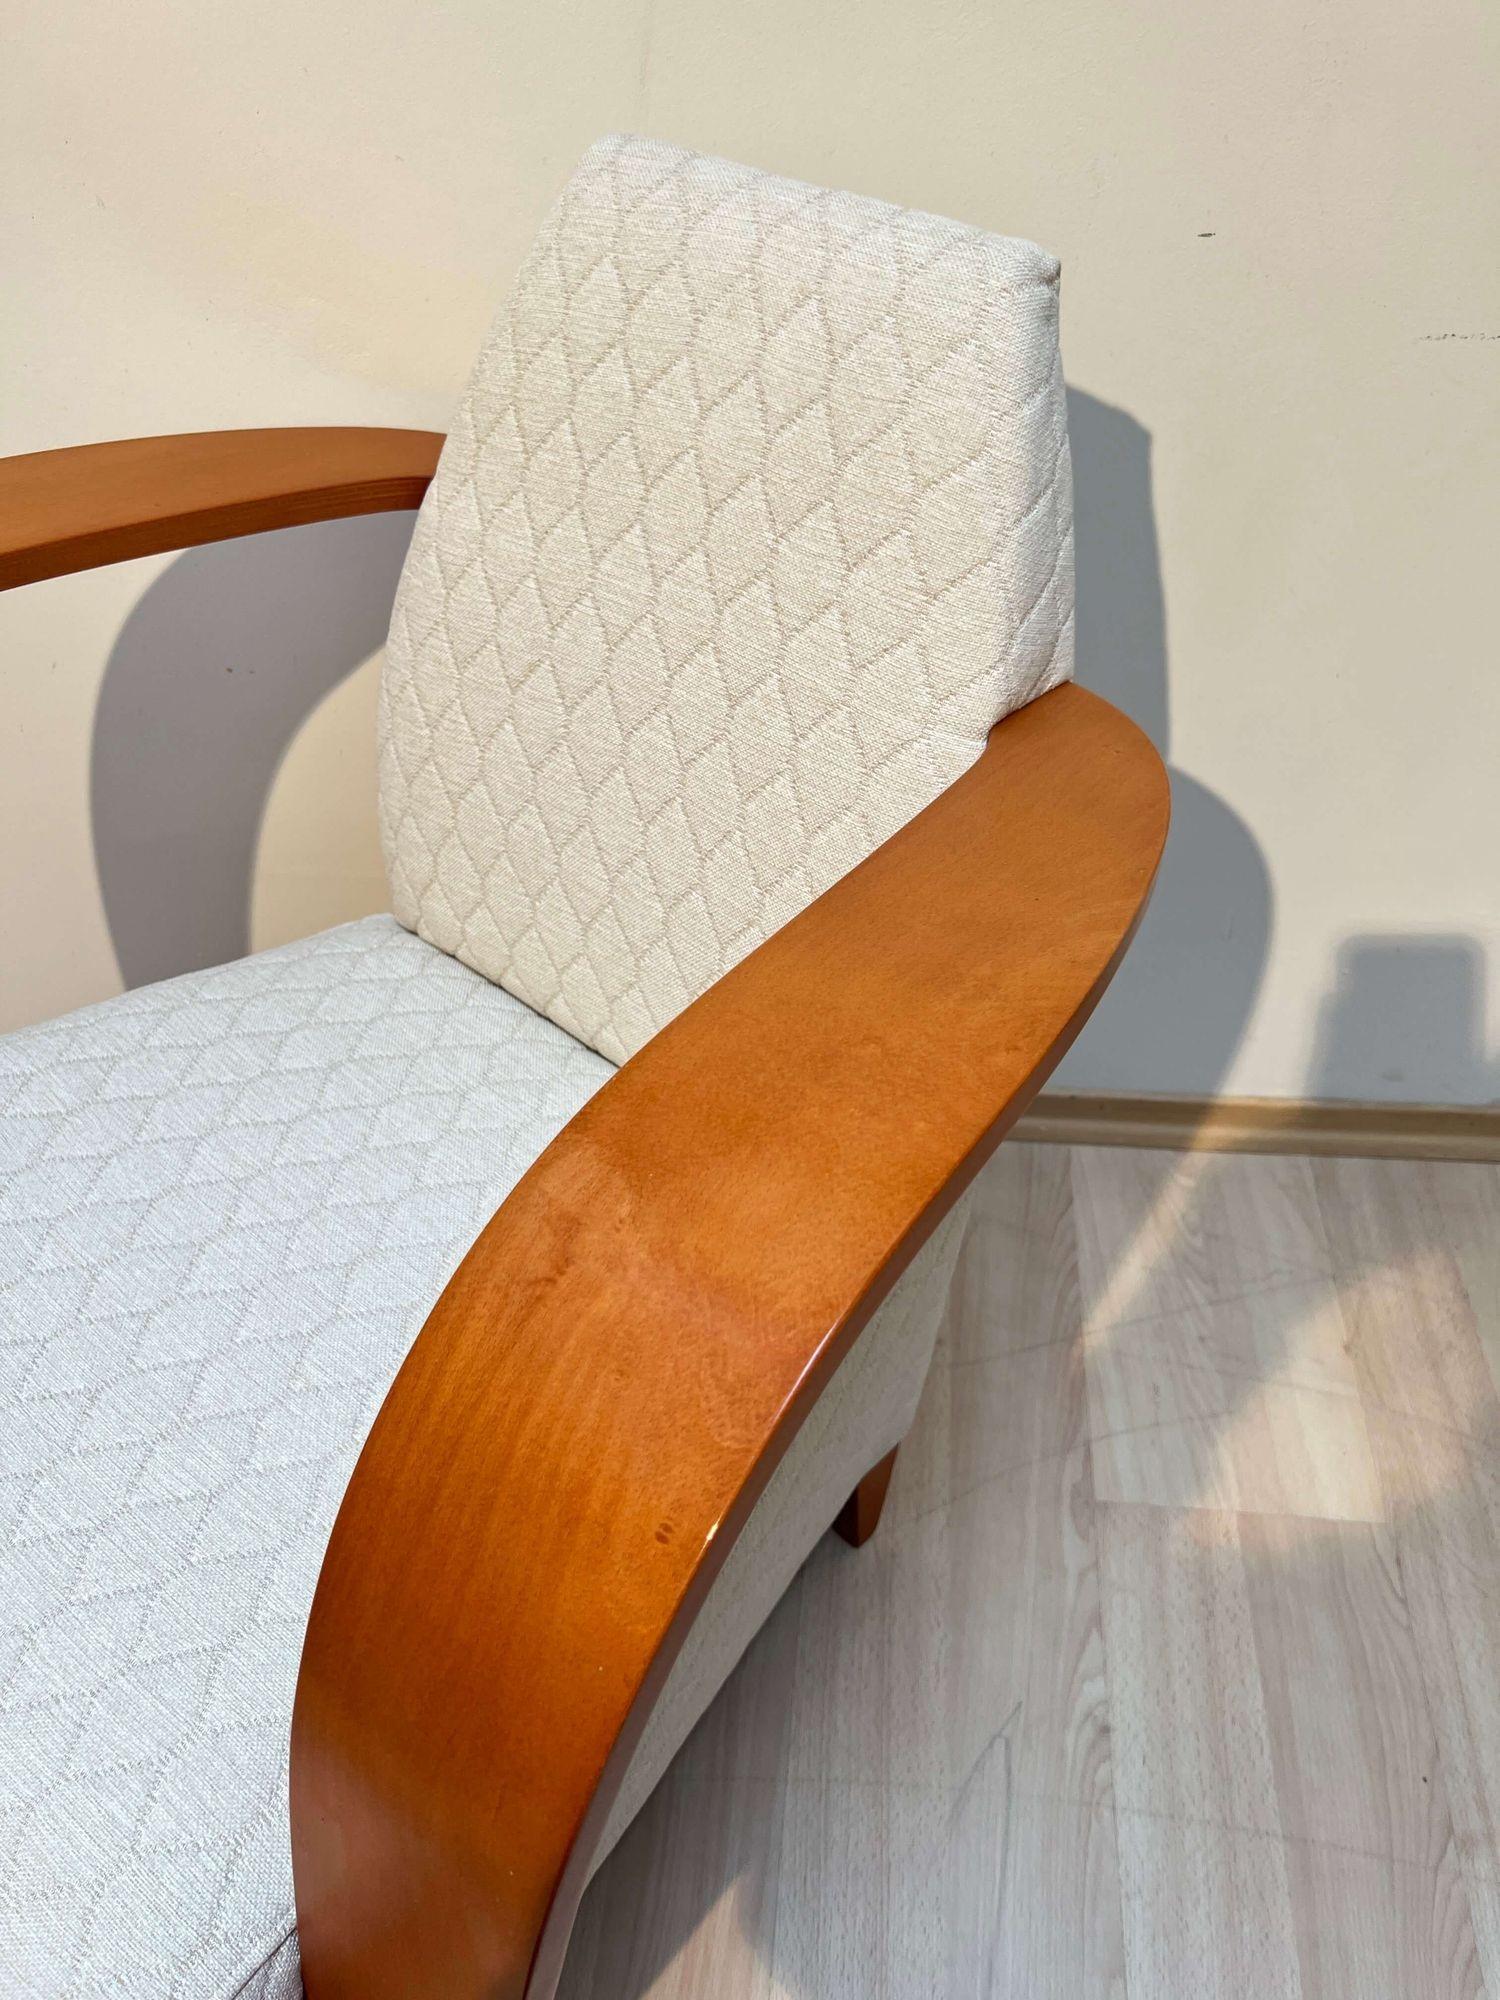 Design Arm Chair, Beech Wood, Cream-white Quilt Fabric, Spain, 1990s For Sale 5